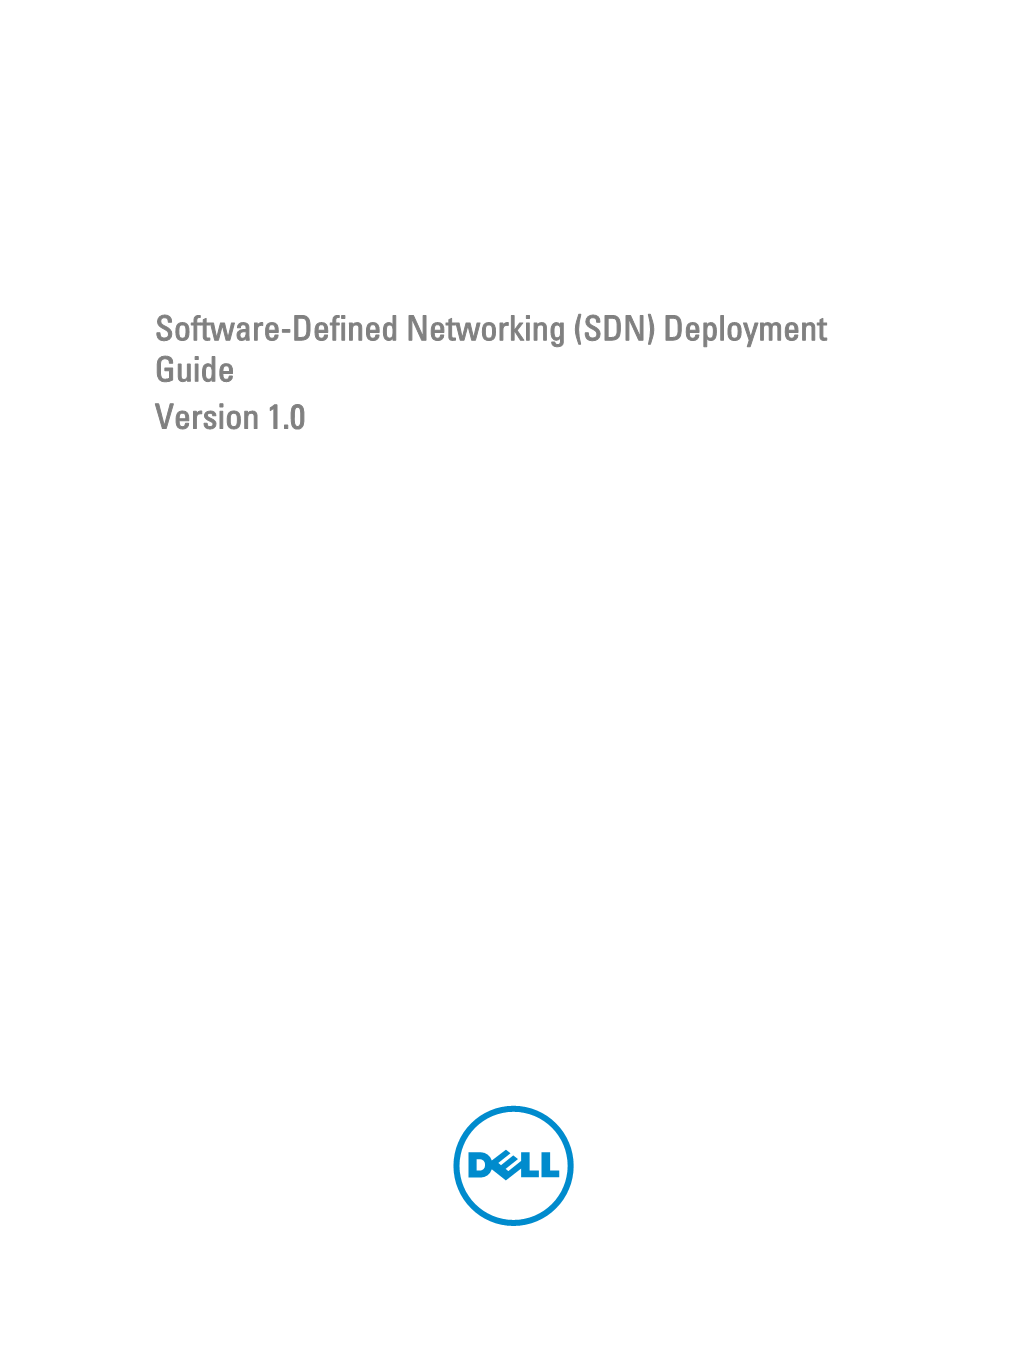 Software-Defined Networking (SDN) Deployment Guide Version 1.0 Notes, Cautions, and Warnings